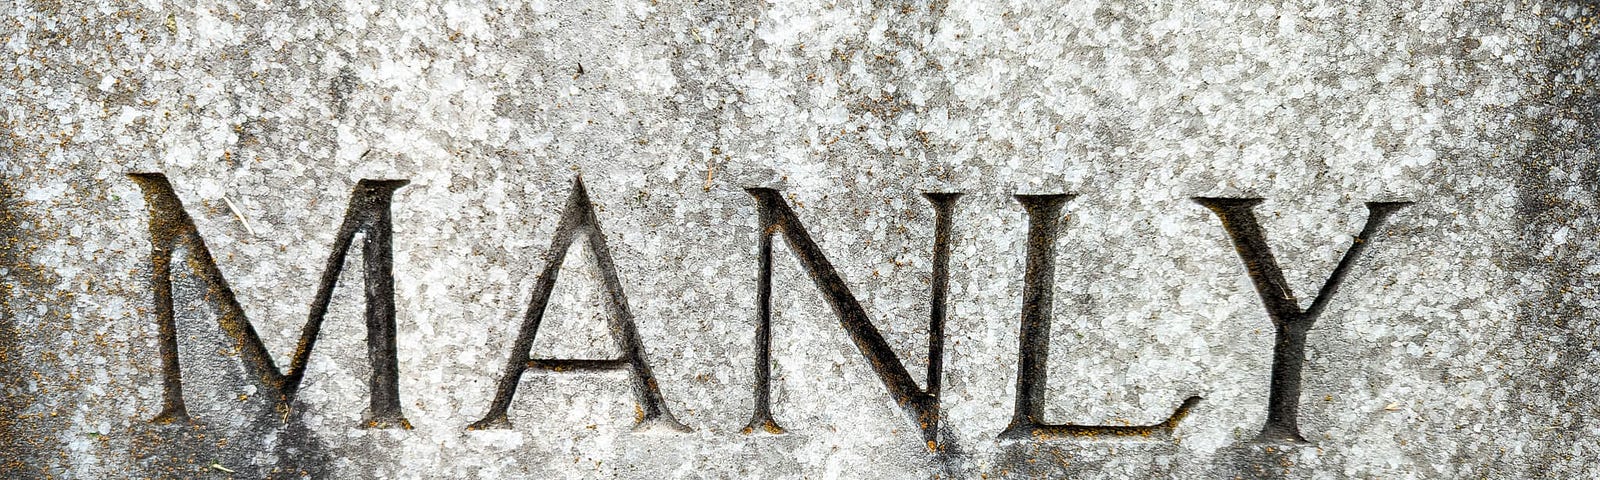 Gravestone bearing the word “MANLY”. Don’t read anything into the fact that this is a gravestone